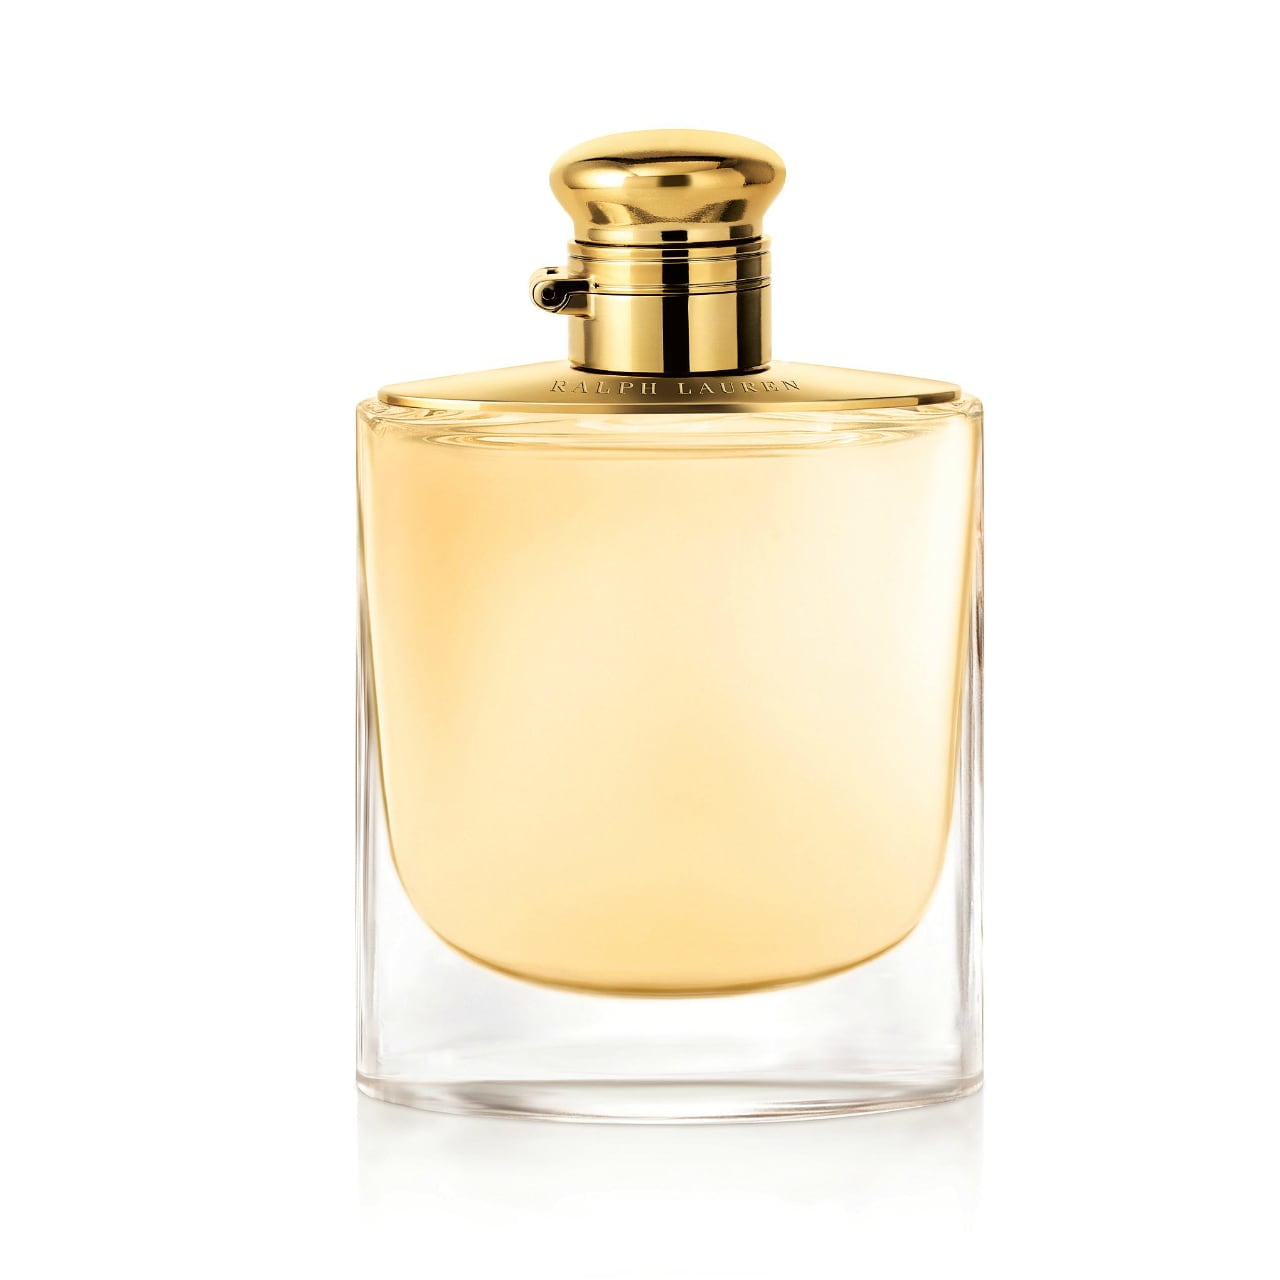 WHICH PERFUME LASTS LONGER? WOMAN INTENSE OR WOMAN BY Ralph Lauren 